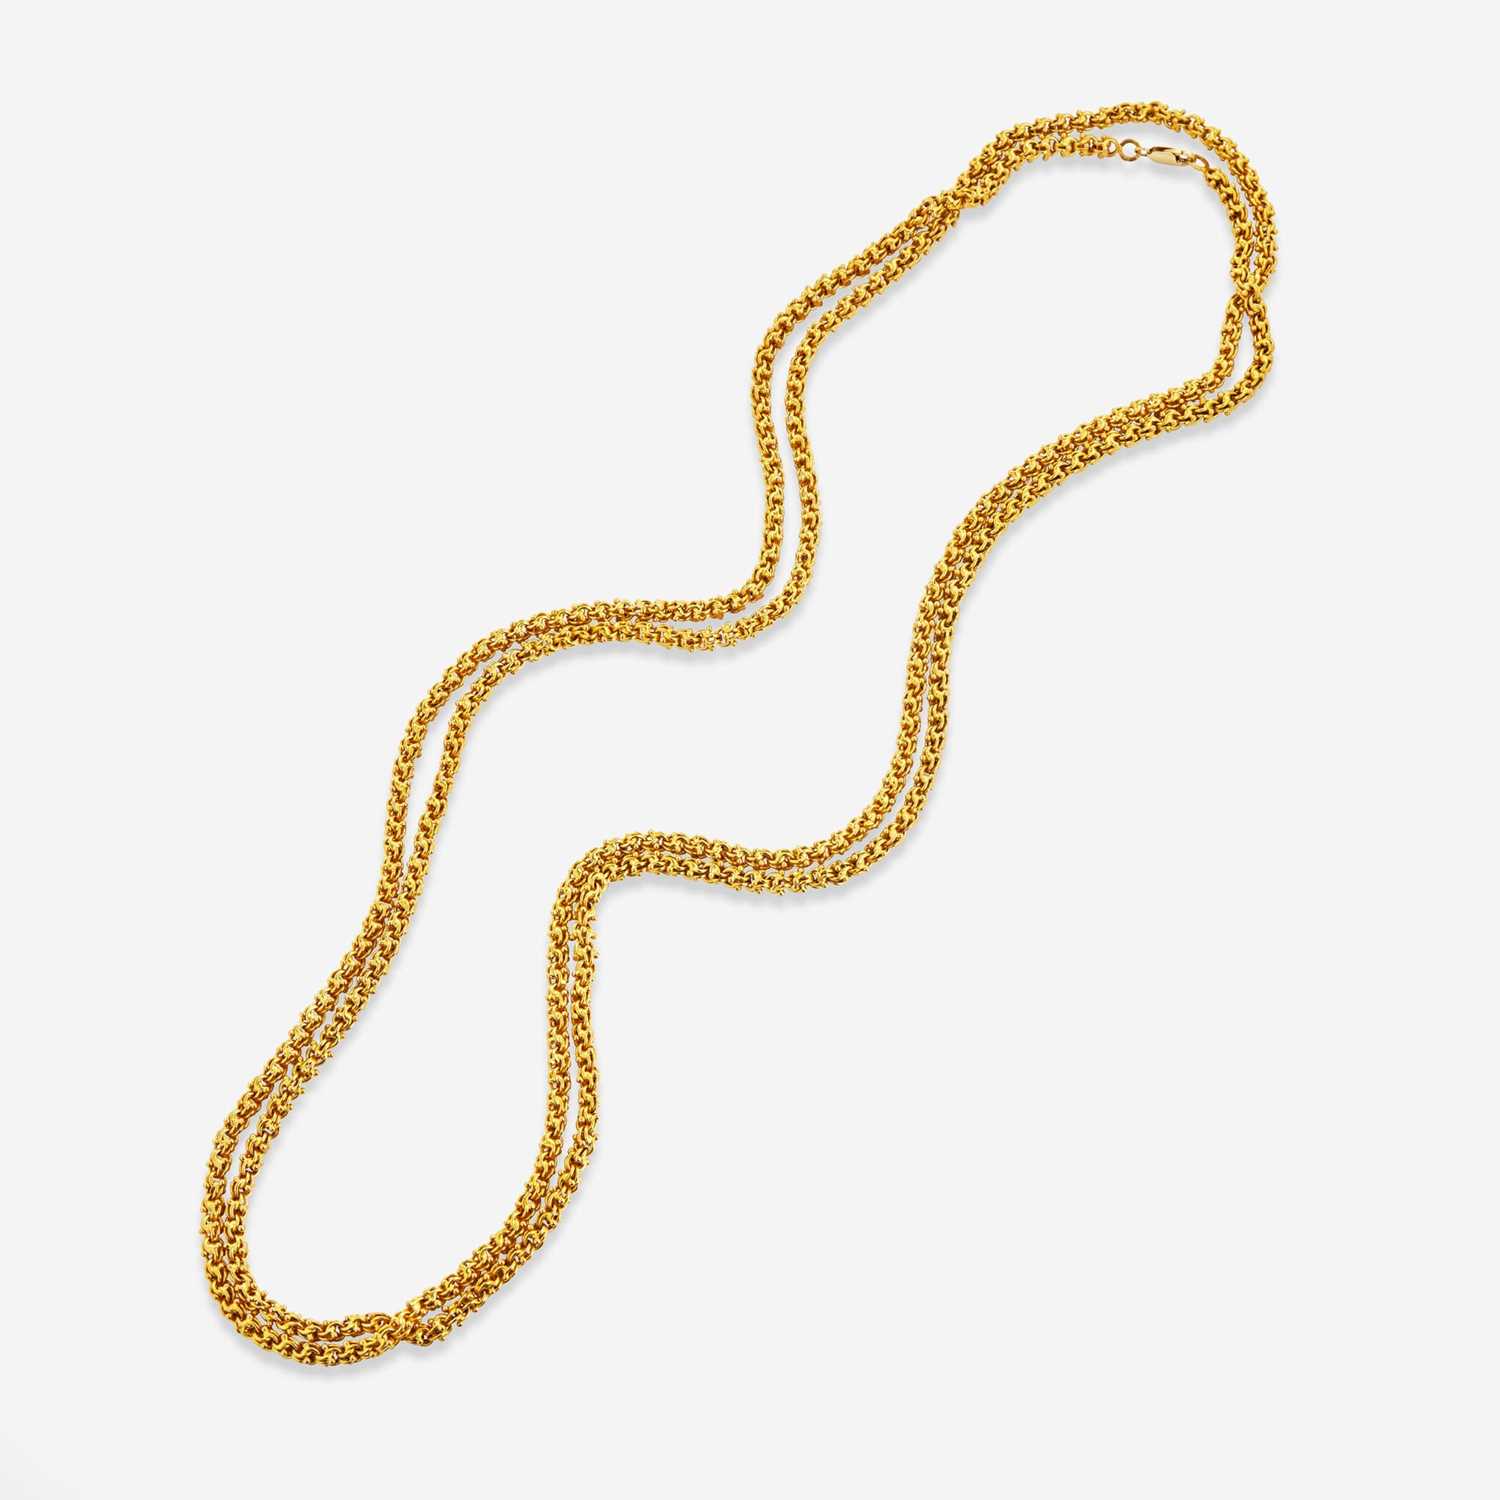 Lot 7 - An 18K Yellow Gold Long Chain Necklace